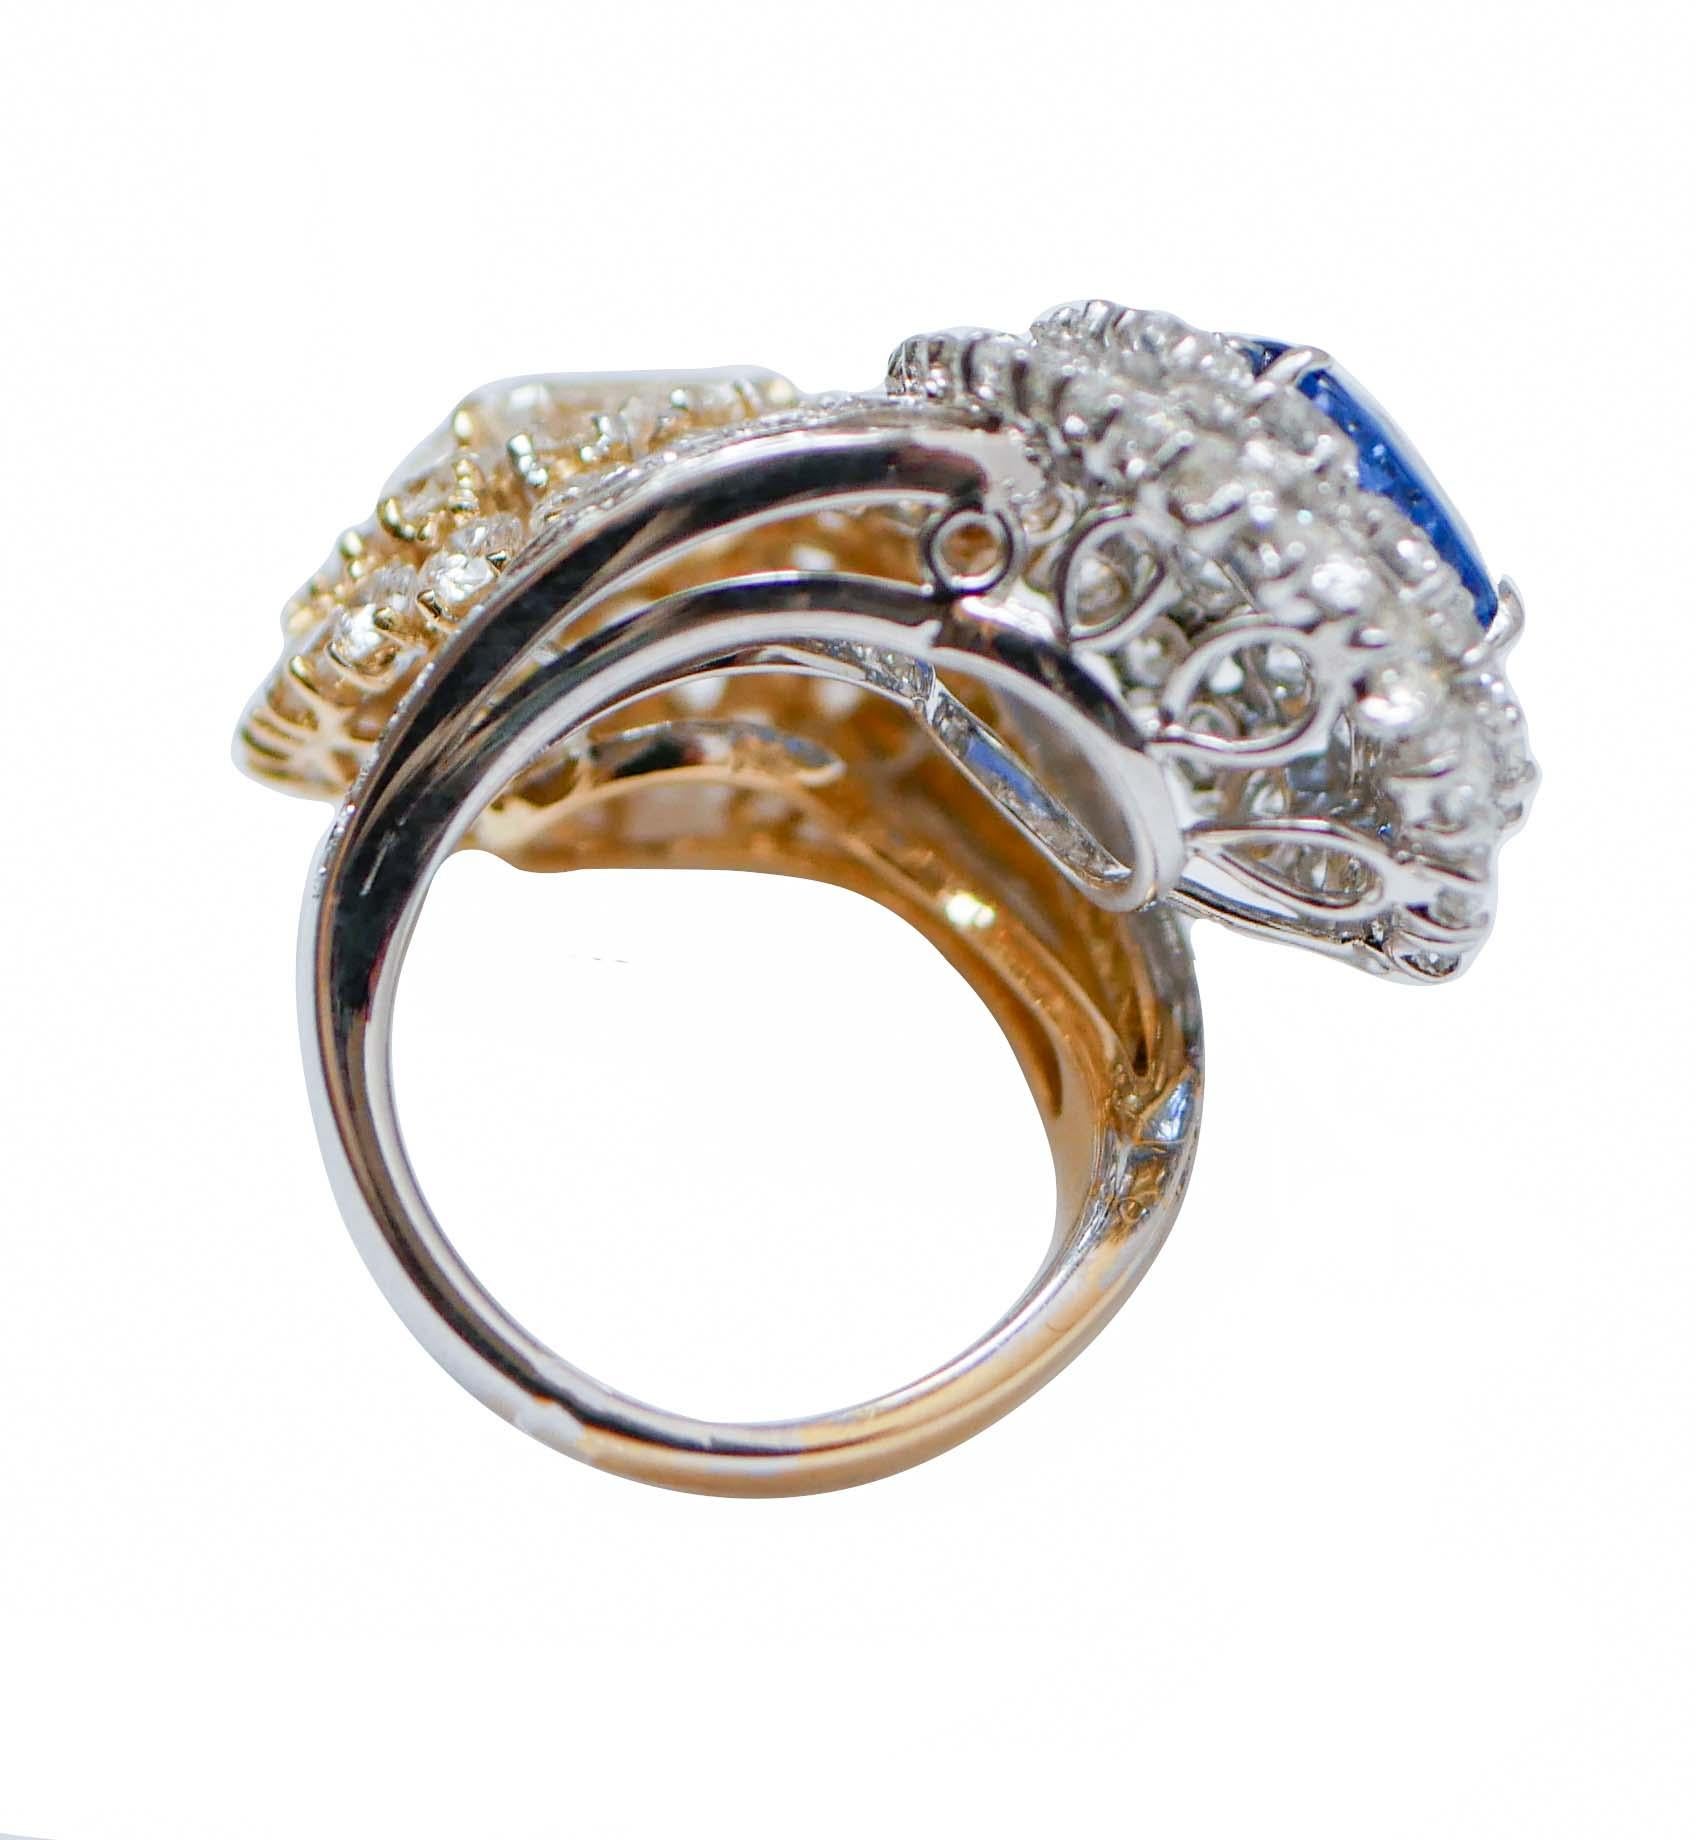 Mixed Cut Sapphire, Diamonds, 18 Karat White Gold and Yellow Gold Ring. For Sale